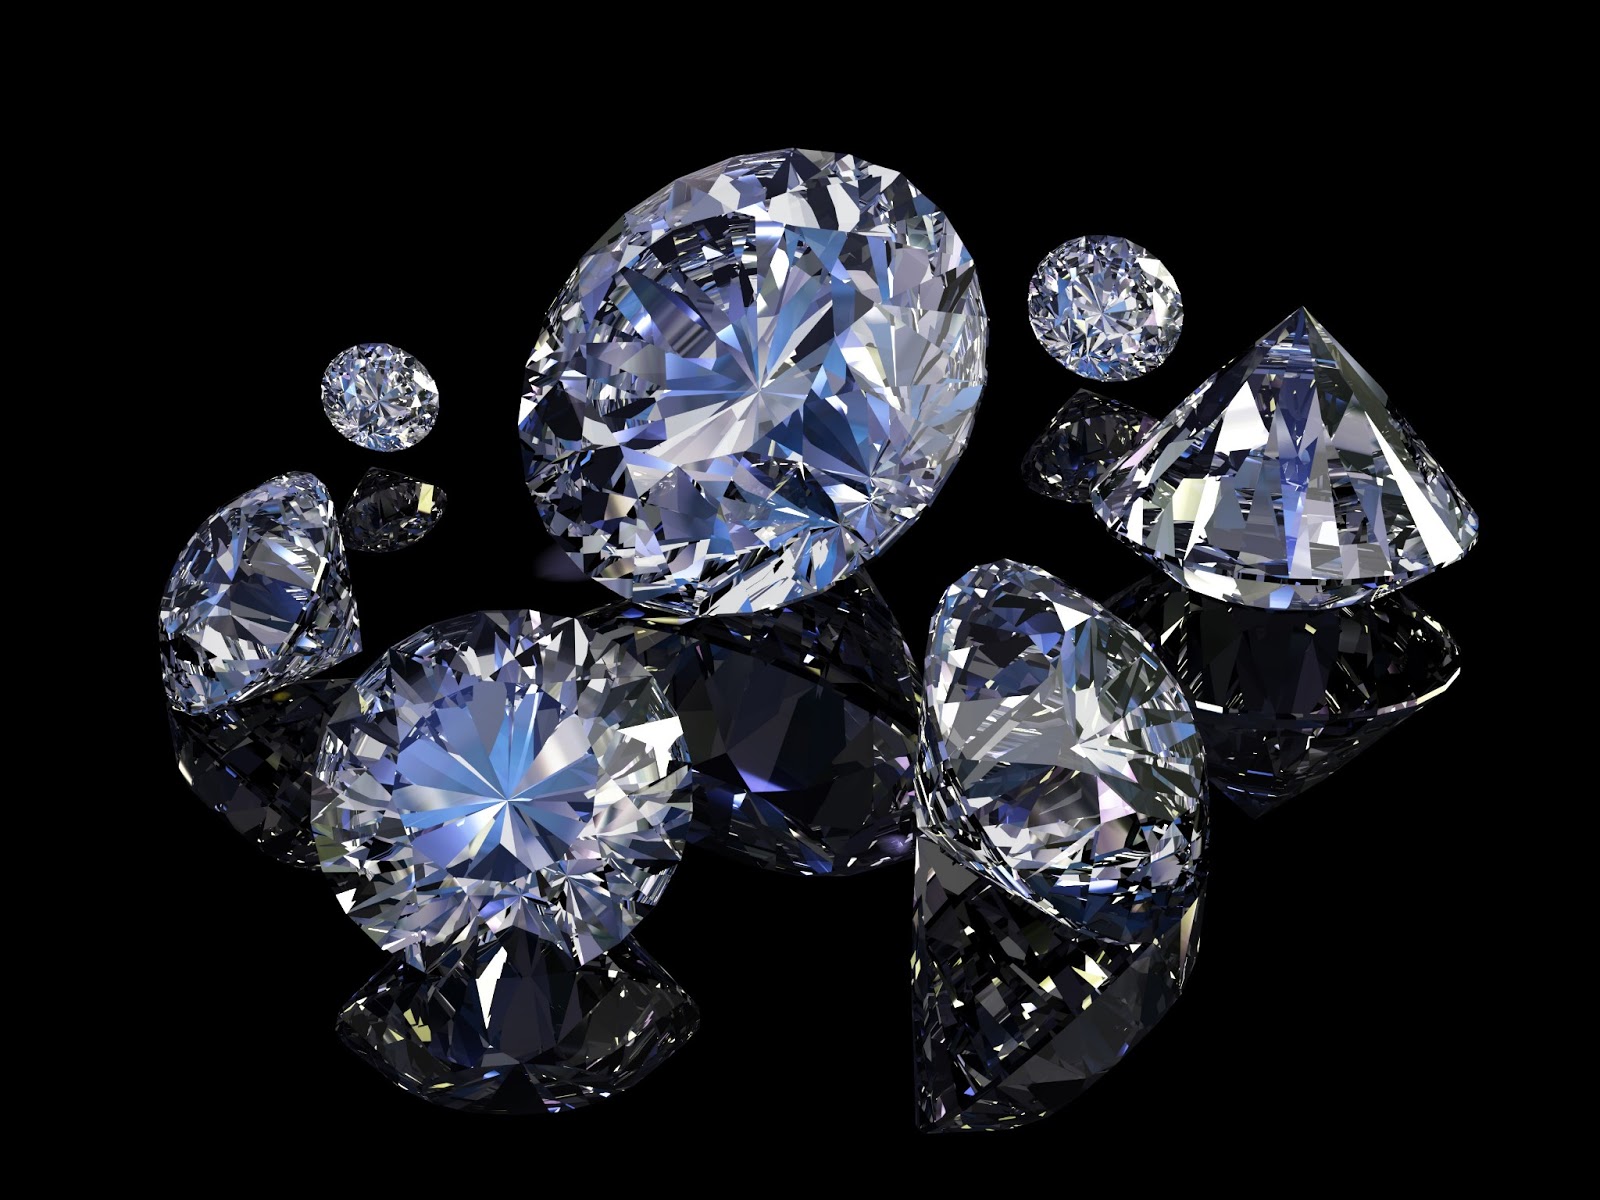 Gallery For Gt Diamond Background Wallpaper HD